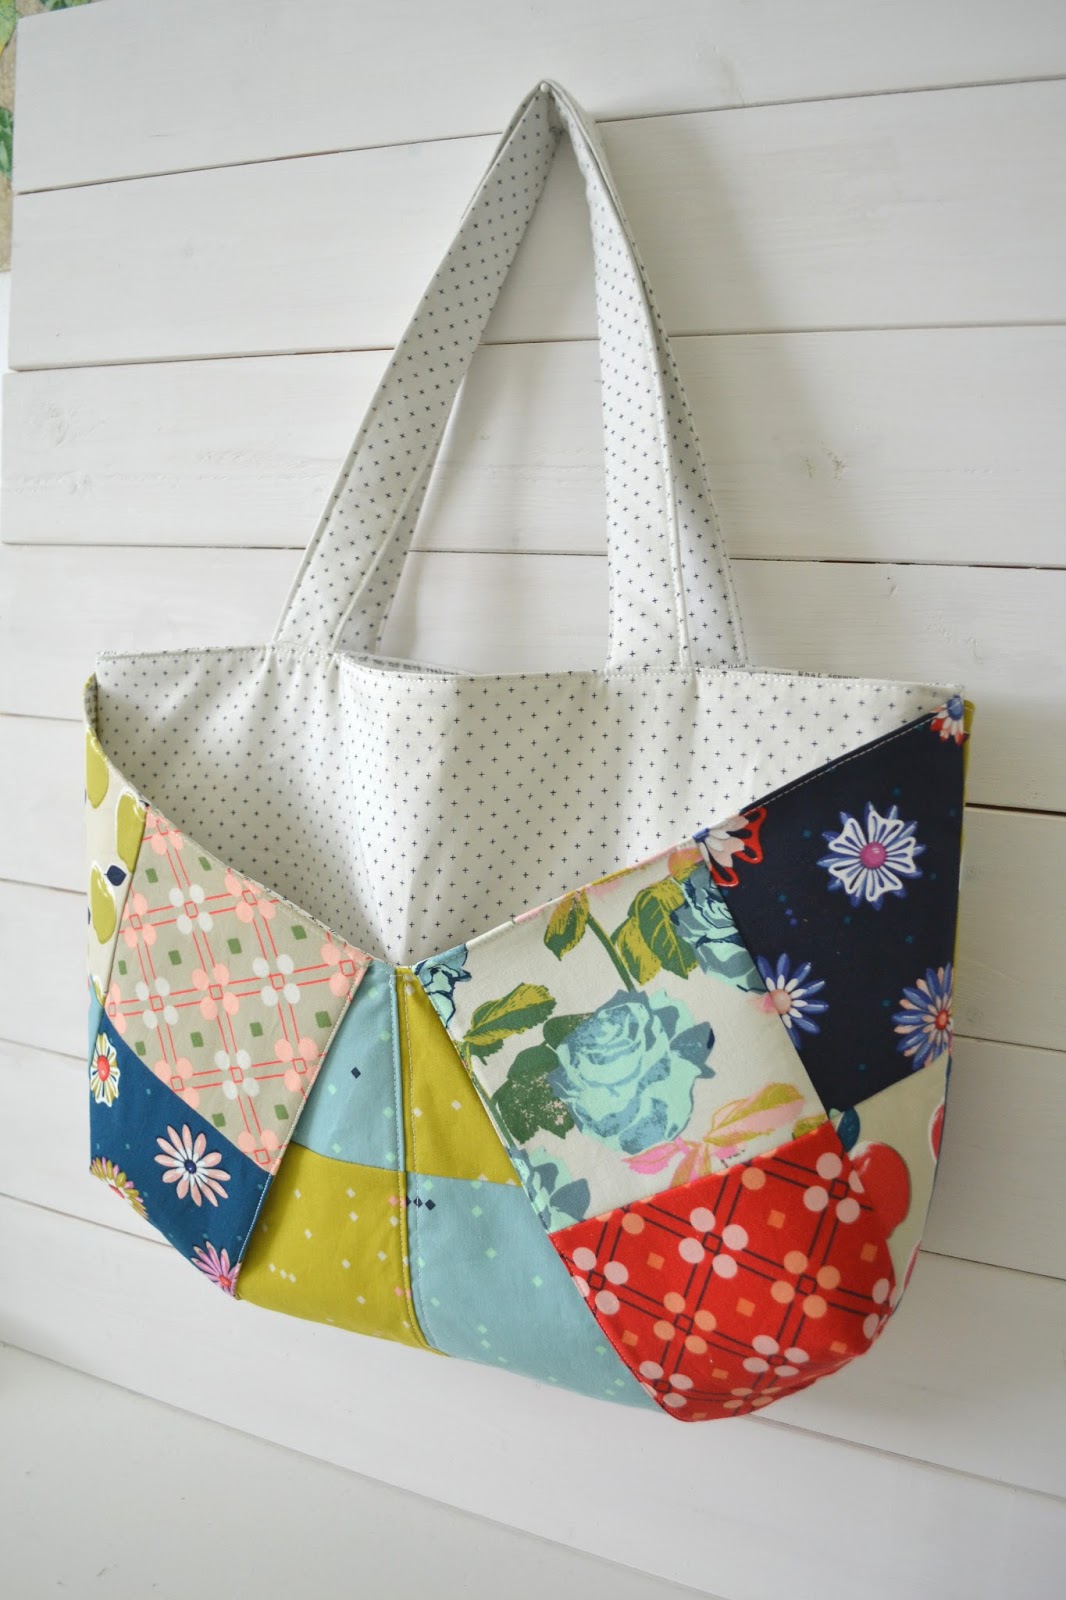 Tea Rose Home: Colorful Patchwork Bags and Baskets Blog Hop & Crafsy ...